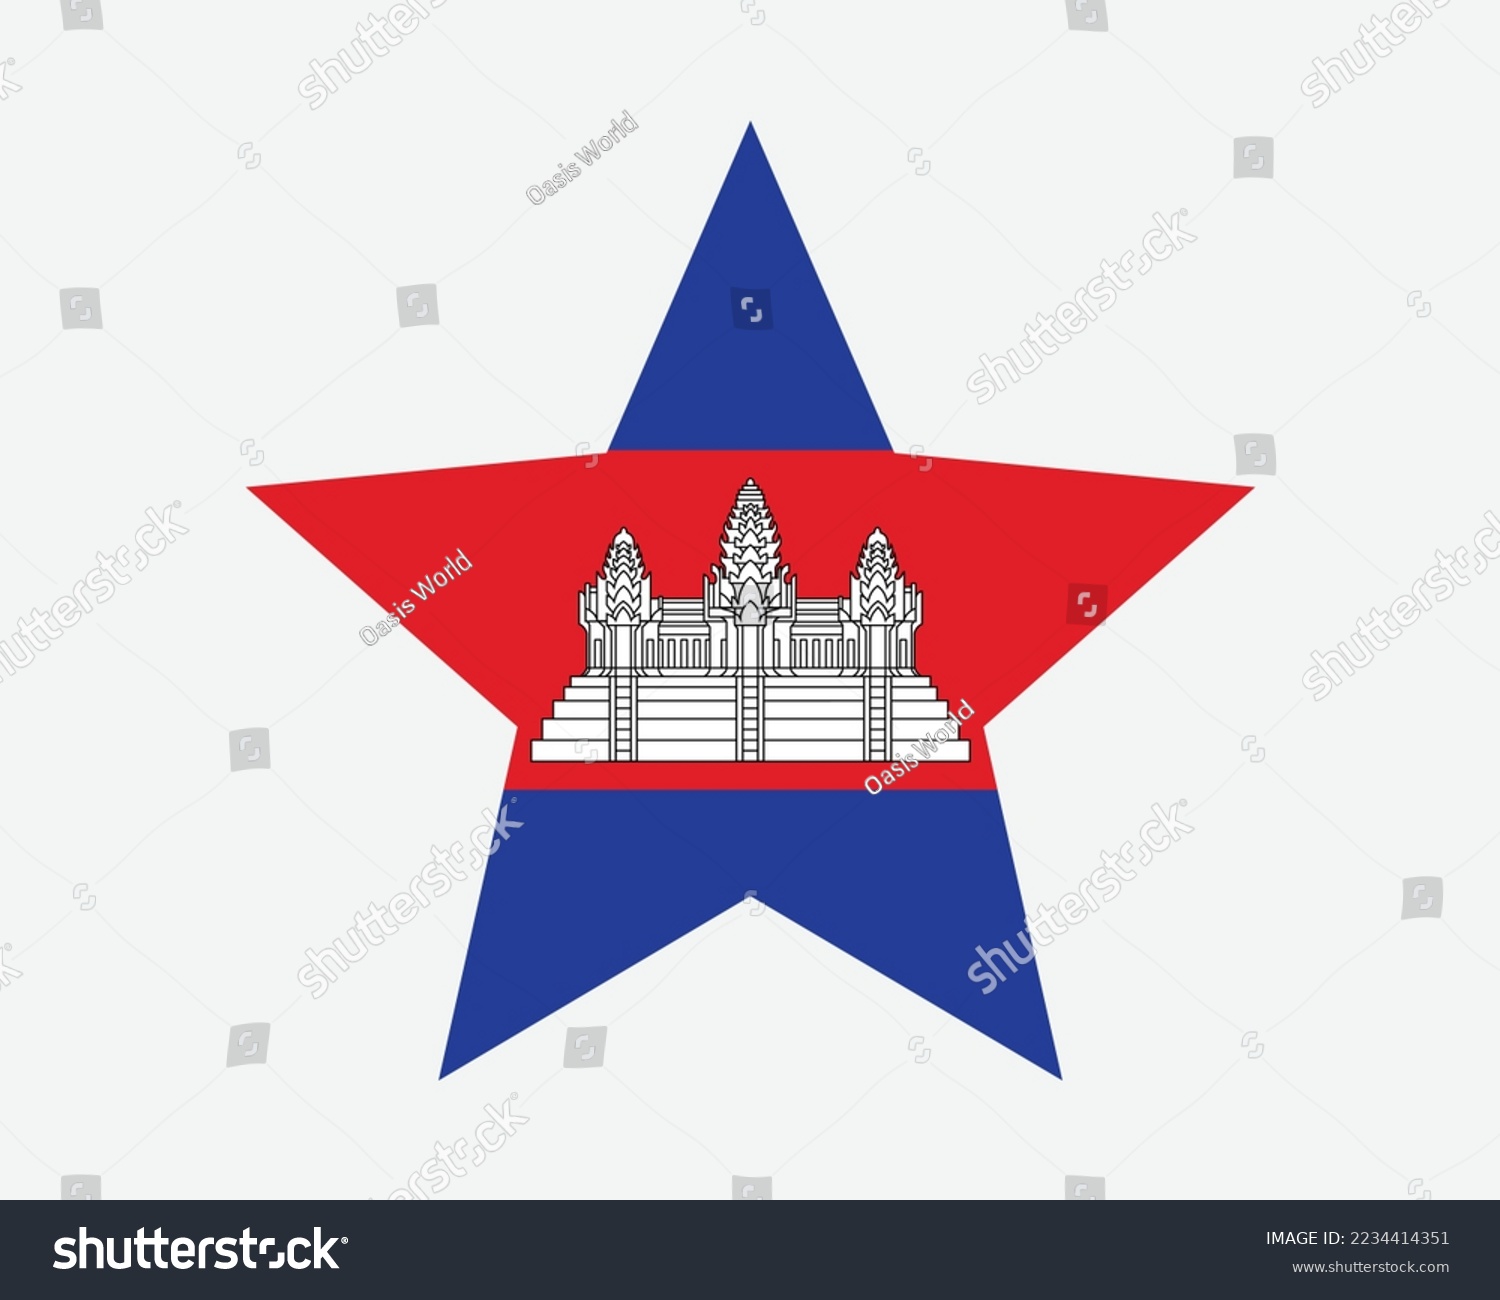 SVG of Cambodia Star Flag. Cambodian Star Shape Flag. Kampuchea Khmer Country National Banner Icon Symbol Vector 2D Flat Artwork Graphic Illustration svg